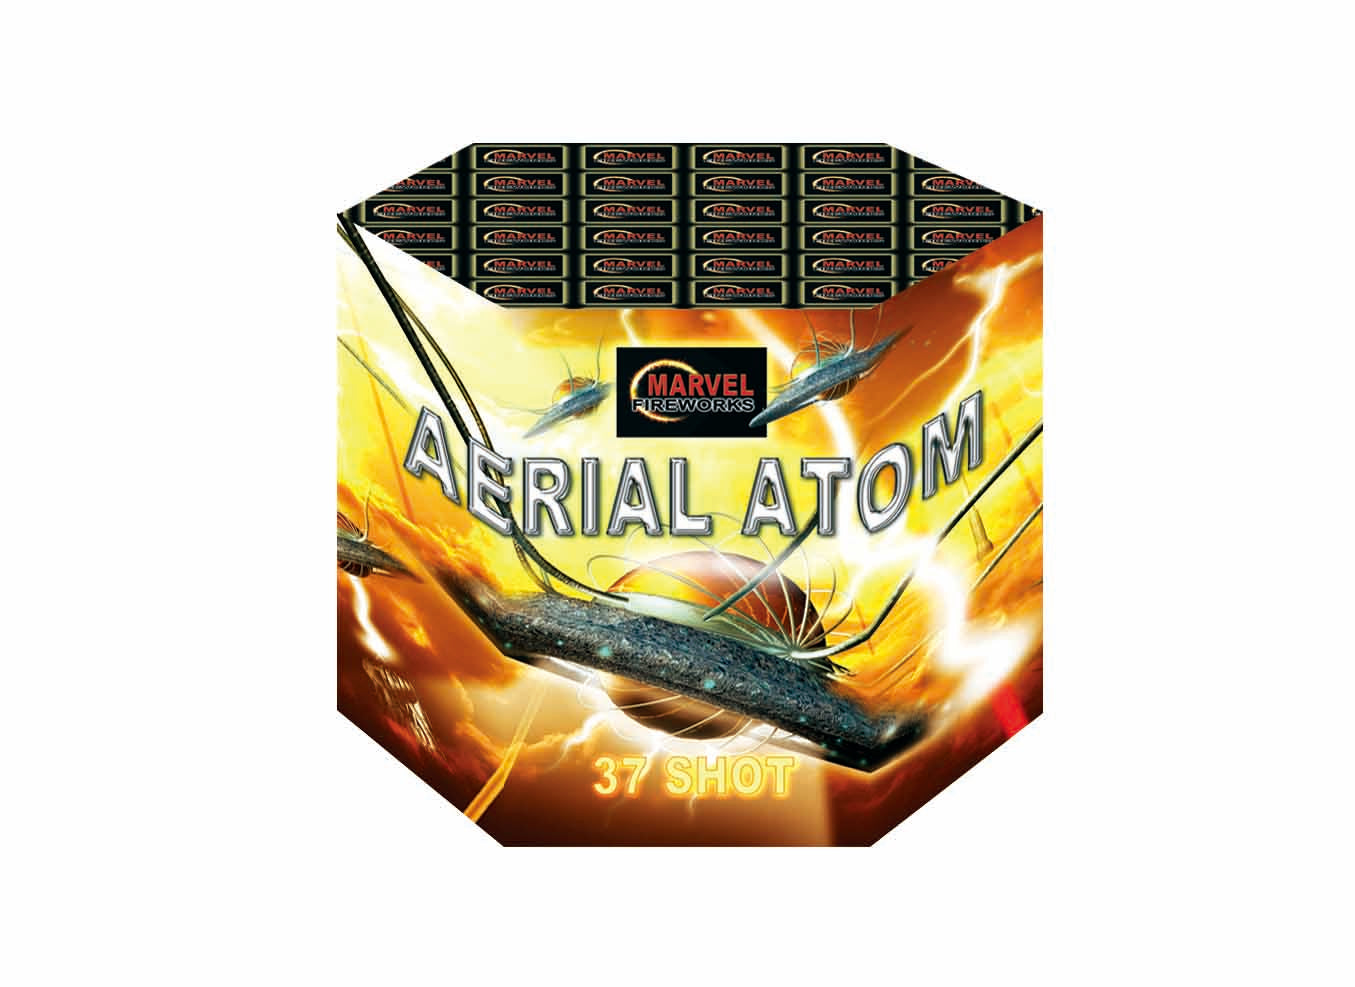 Aerial Atom Single Ignition Firework by Epic Fireworks